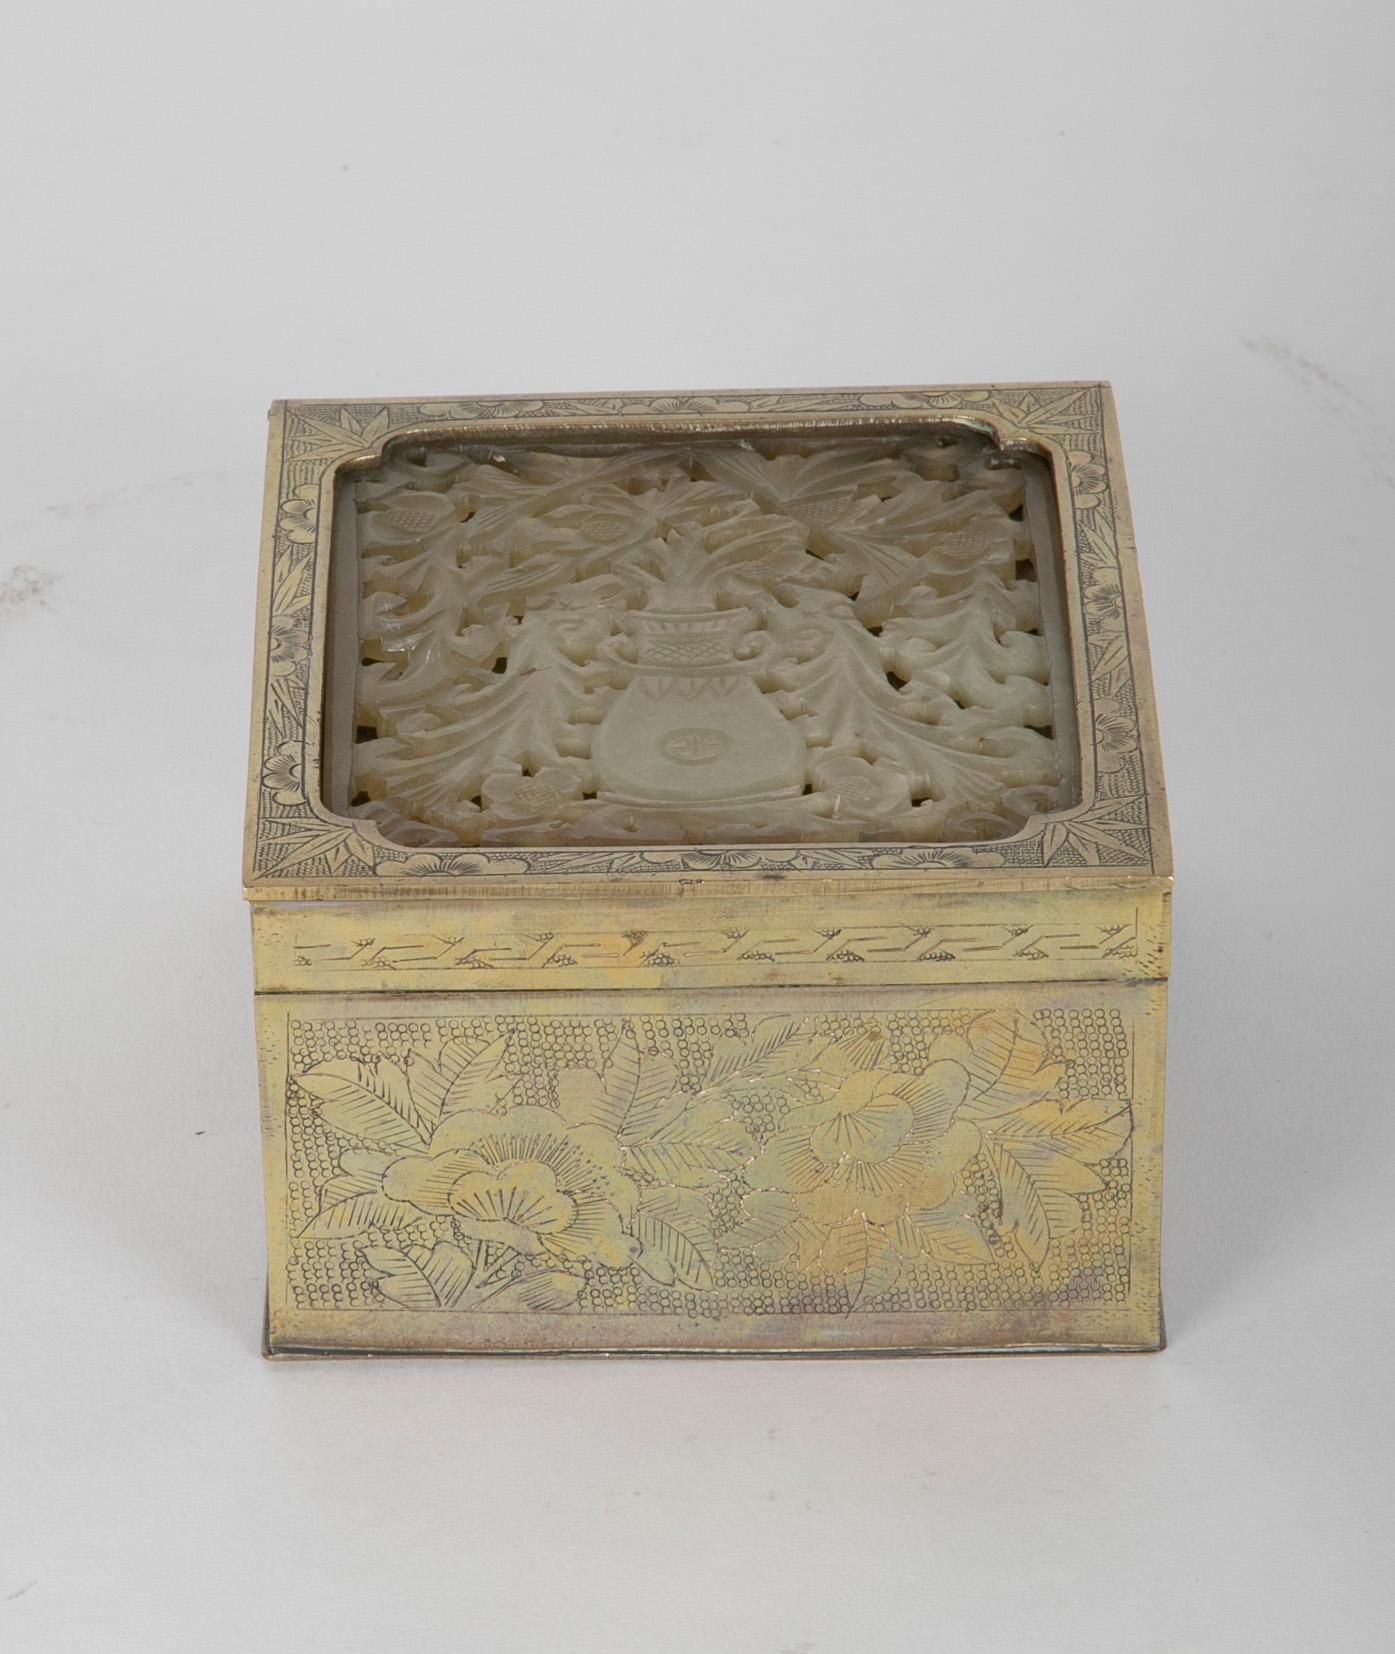 Sweet little Chinese export brass box with beautiful floral etched designs, looks like peonies to me. With a lovely white jade top carved in fretwork with a vase framed by the flowers pouring forth from it and surrounding it. A very elegant overall